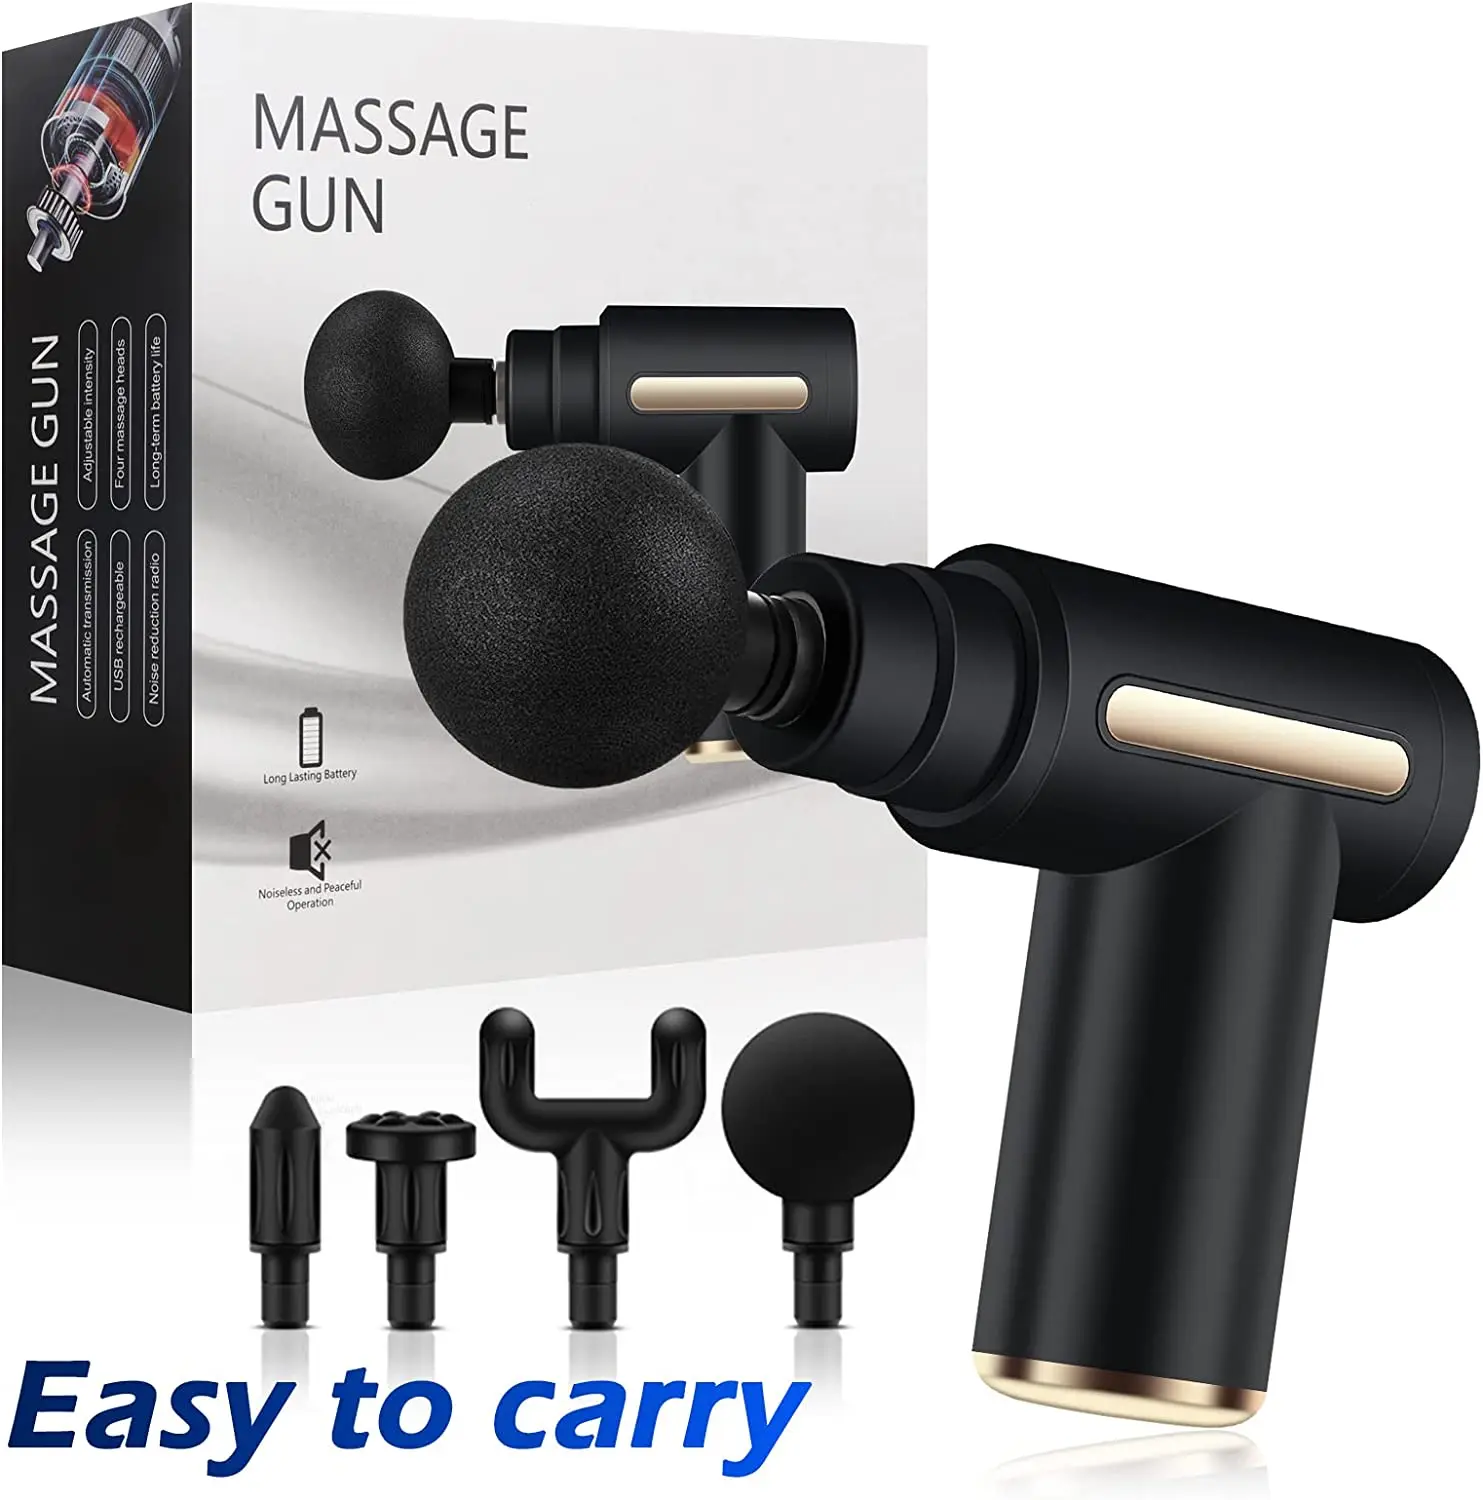 Portable Fascia Gun Vibration Massage Gun Percussion Pistol Massager For Deep Tissue Muscle Body Relaxation Mini Fitness Device sk 60 80 pneumatic percussion breaking vibration pneumatic flow aid hammer impact air hammer aanti blocking device arch